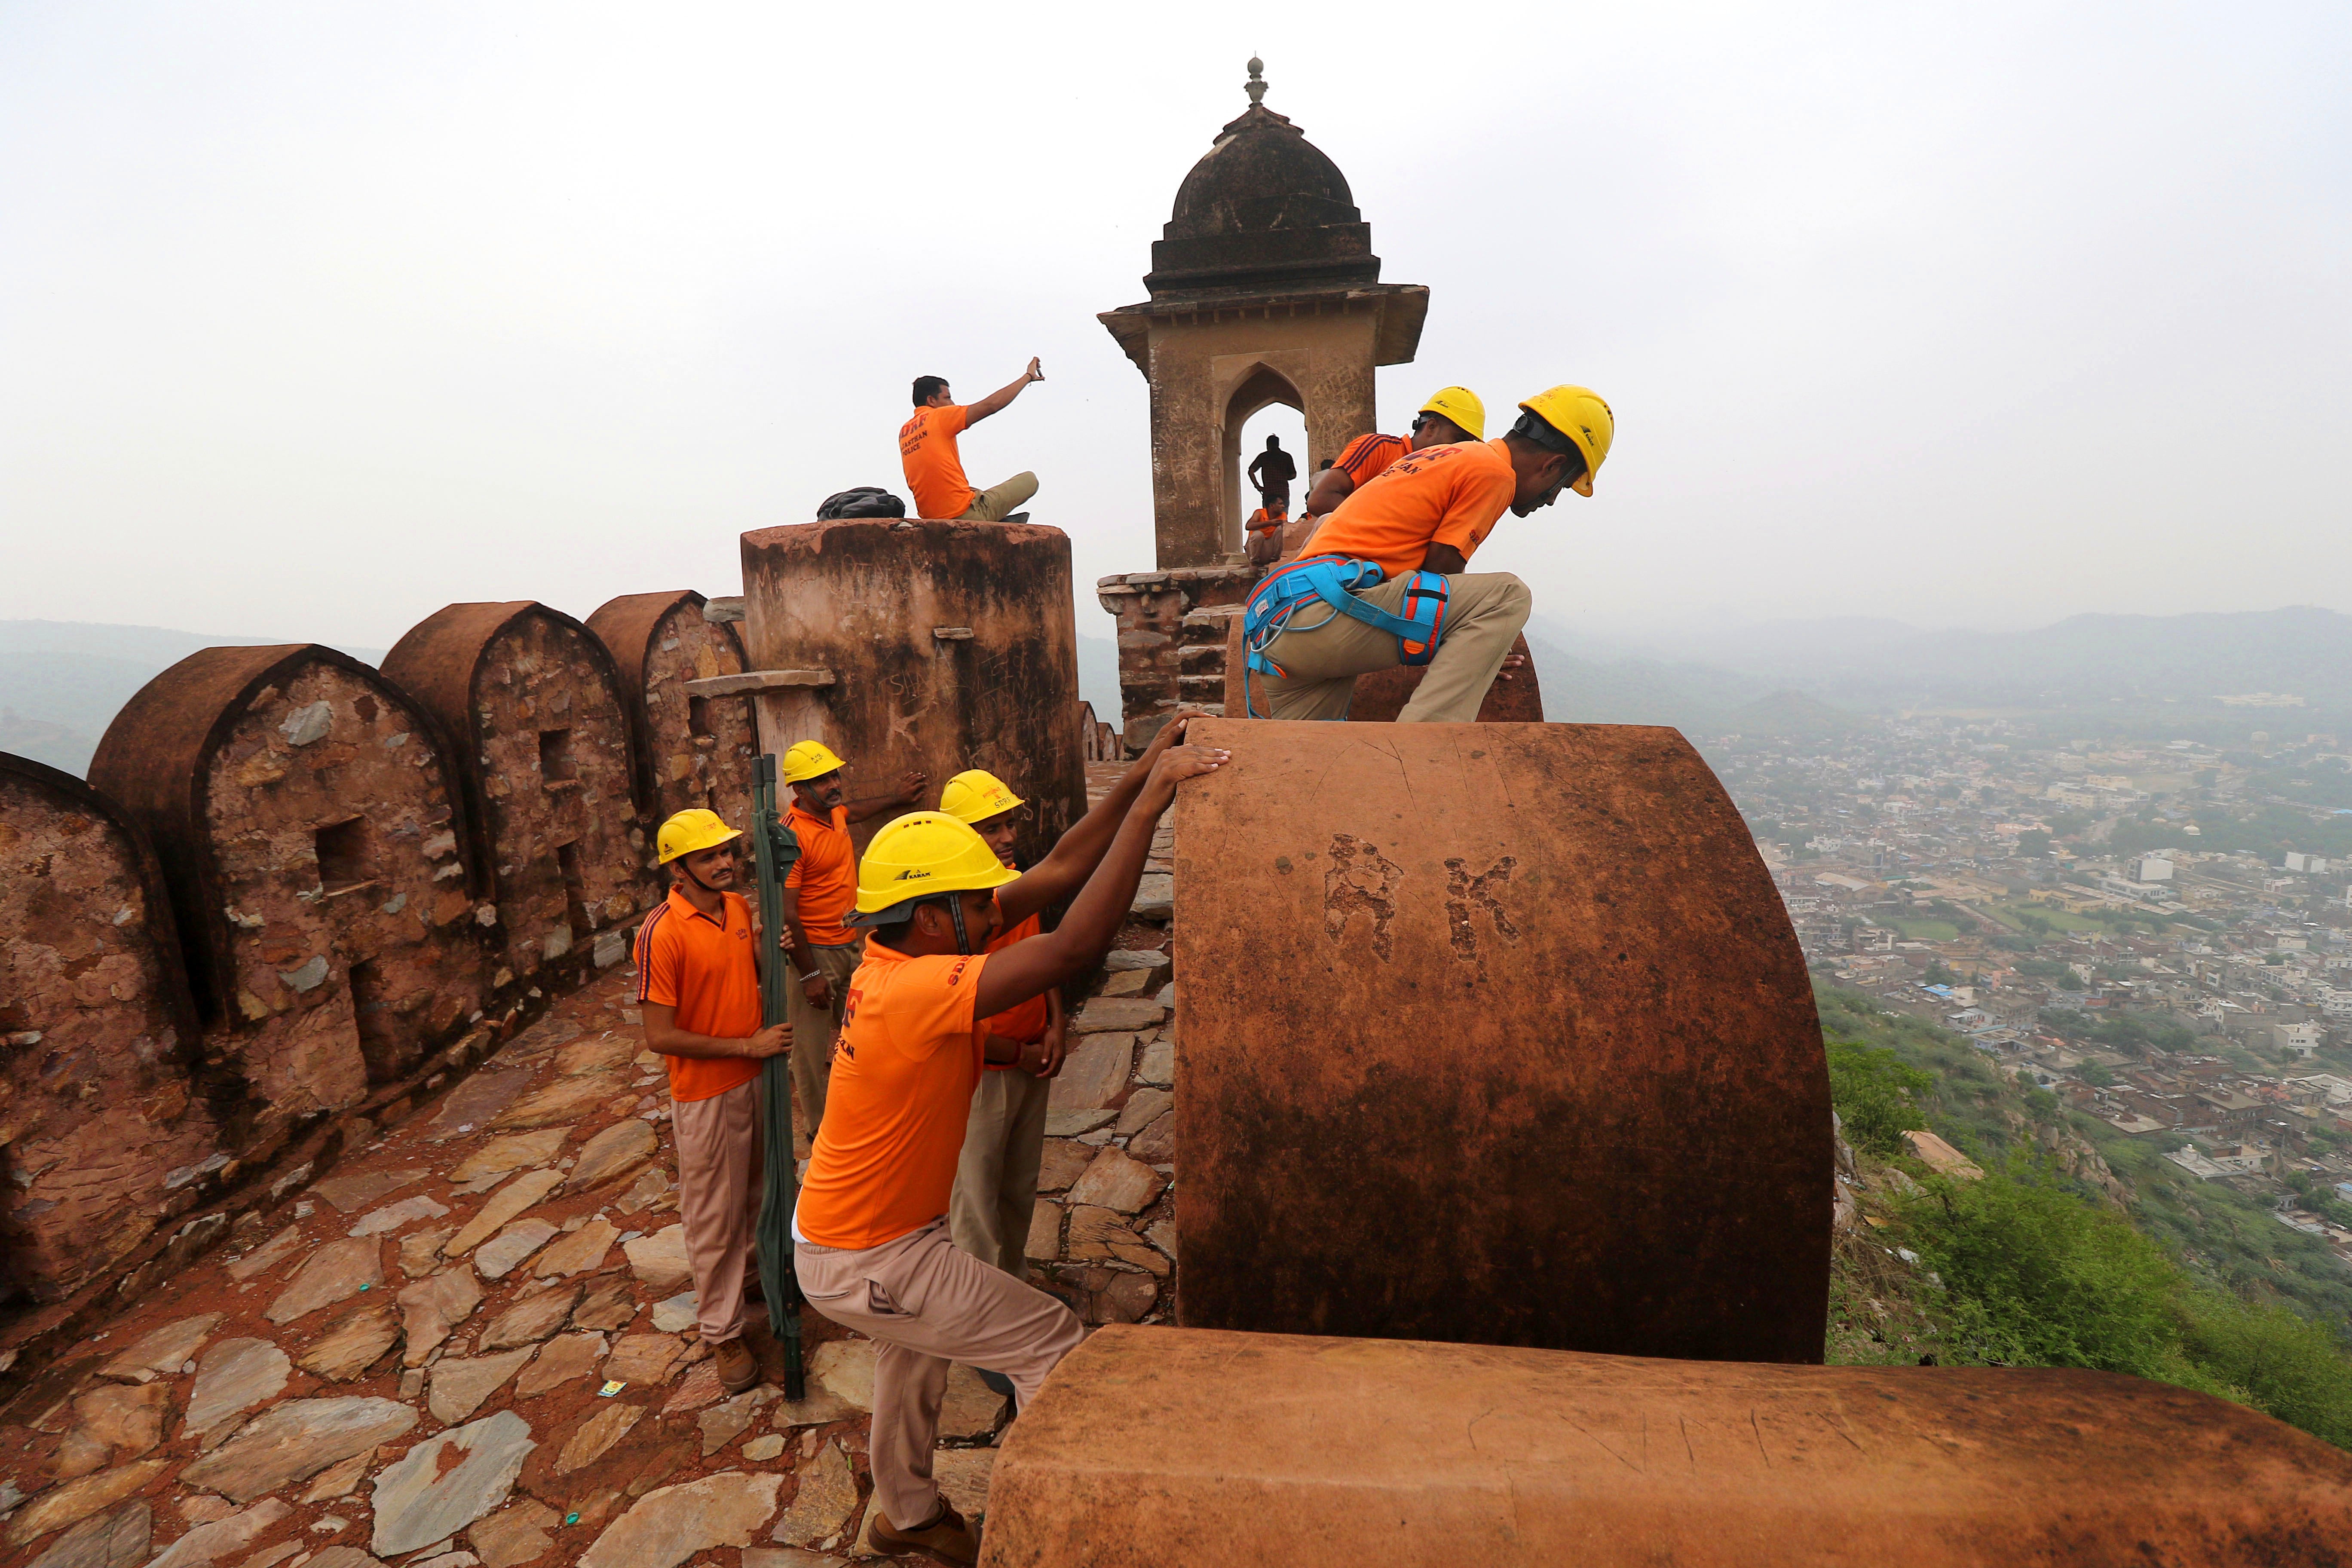 State Disaster Response personnel perform a search operation at a watchtower of the 12th century Amber Fort where 11 people were killed Sunday after being struck by lightning in Jaipur, Rajasthan